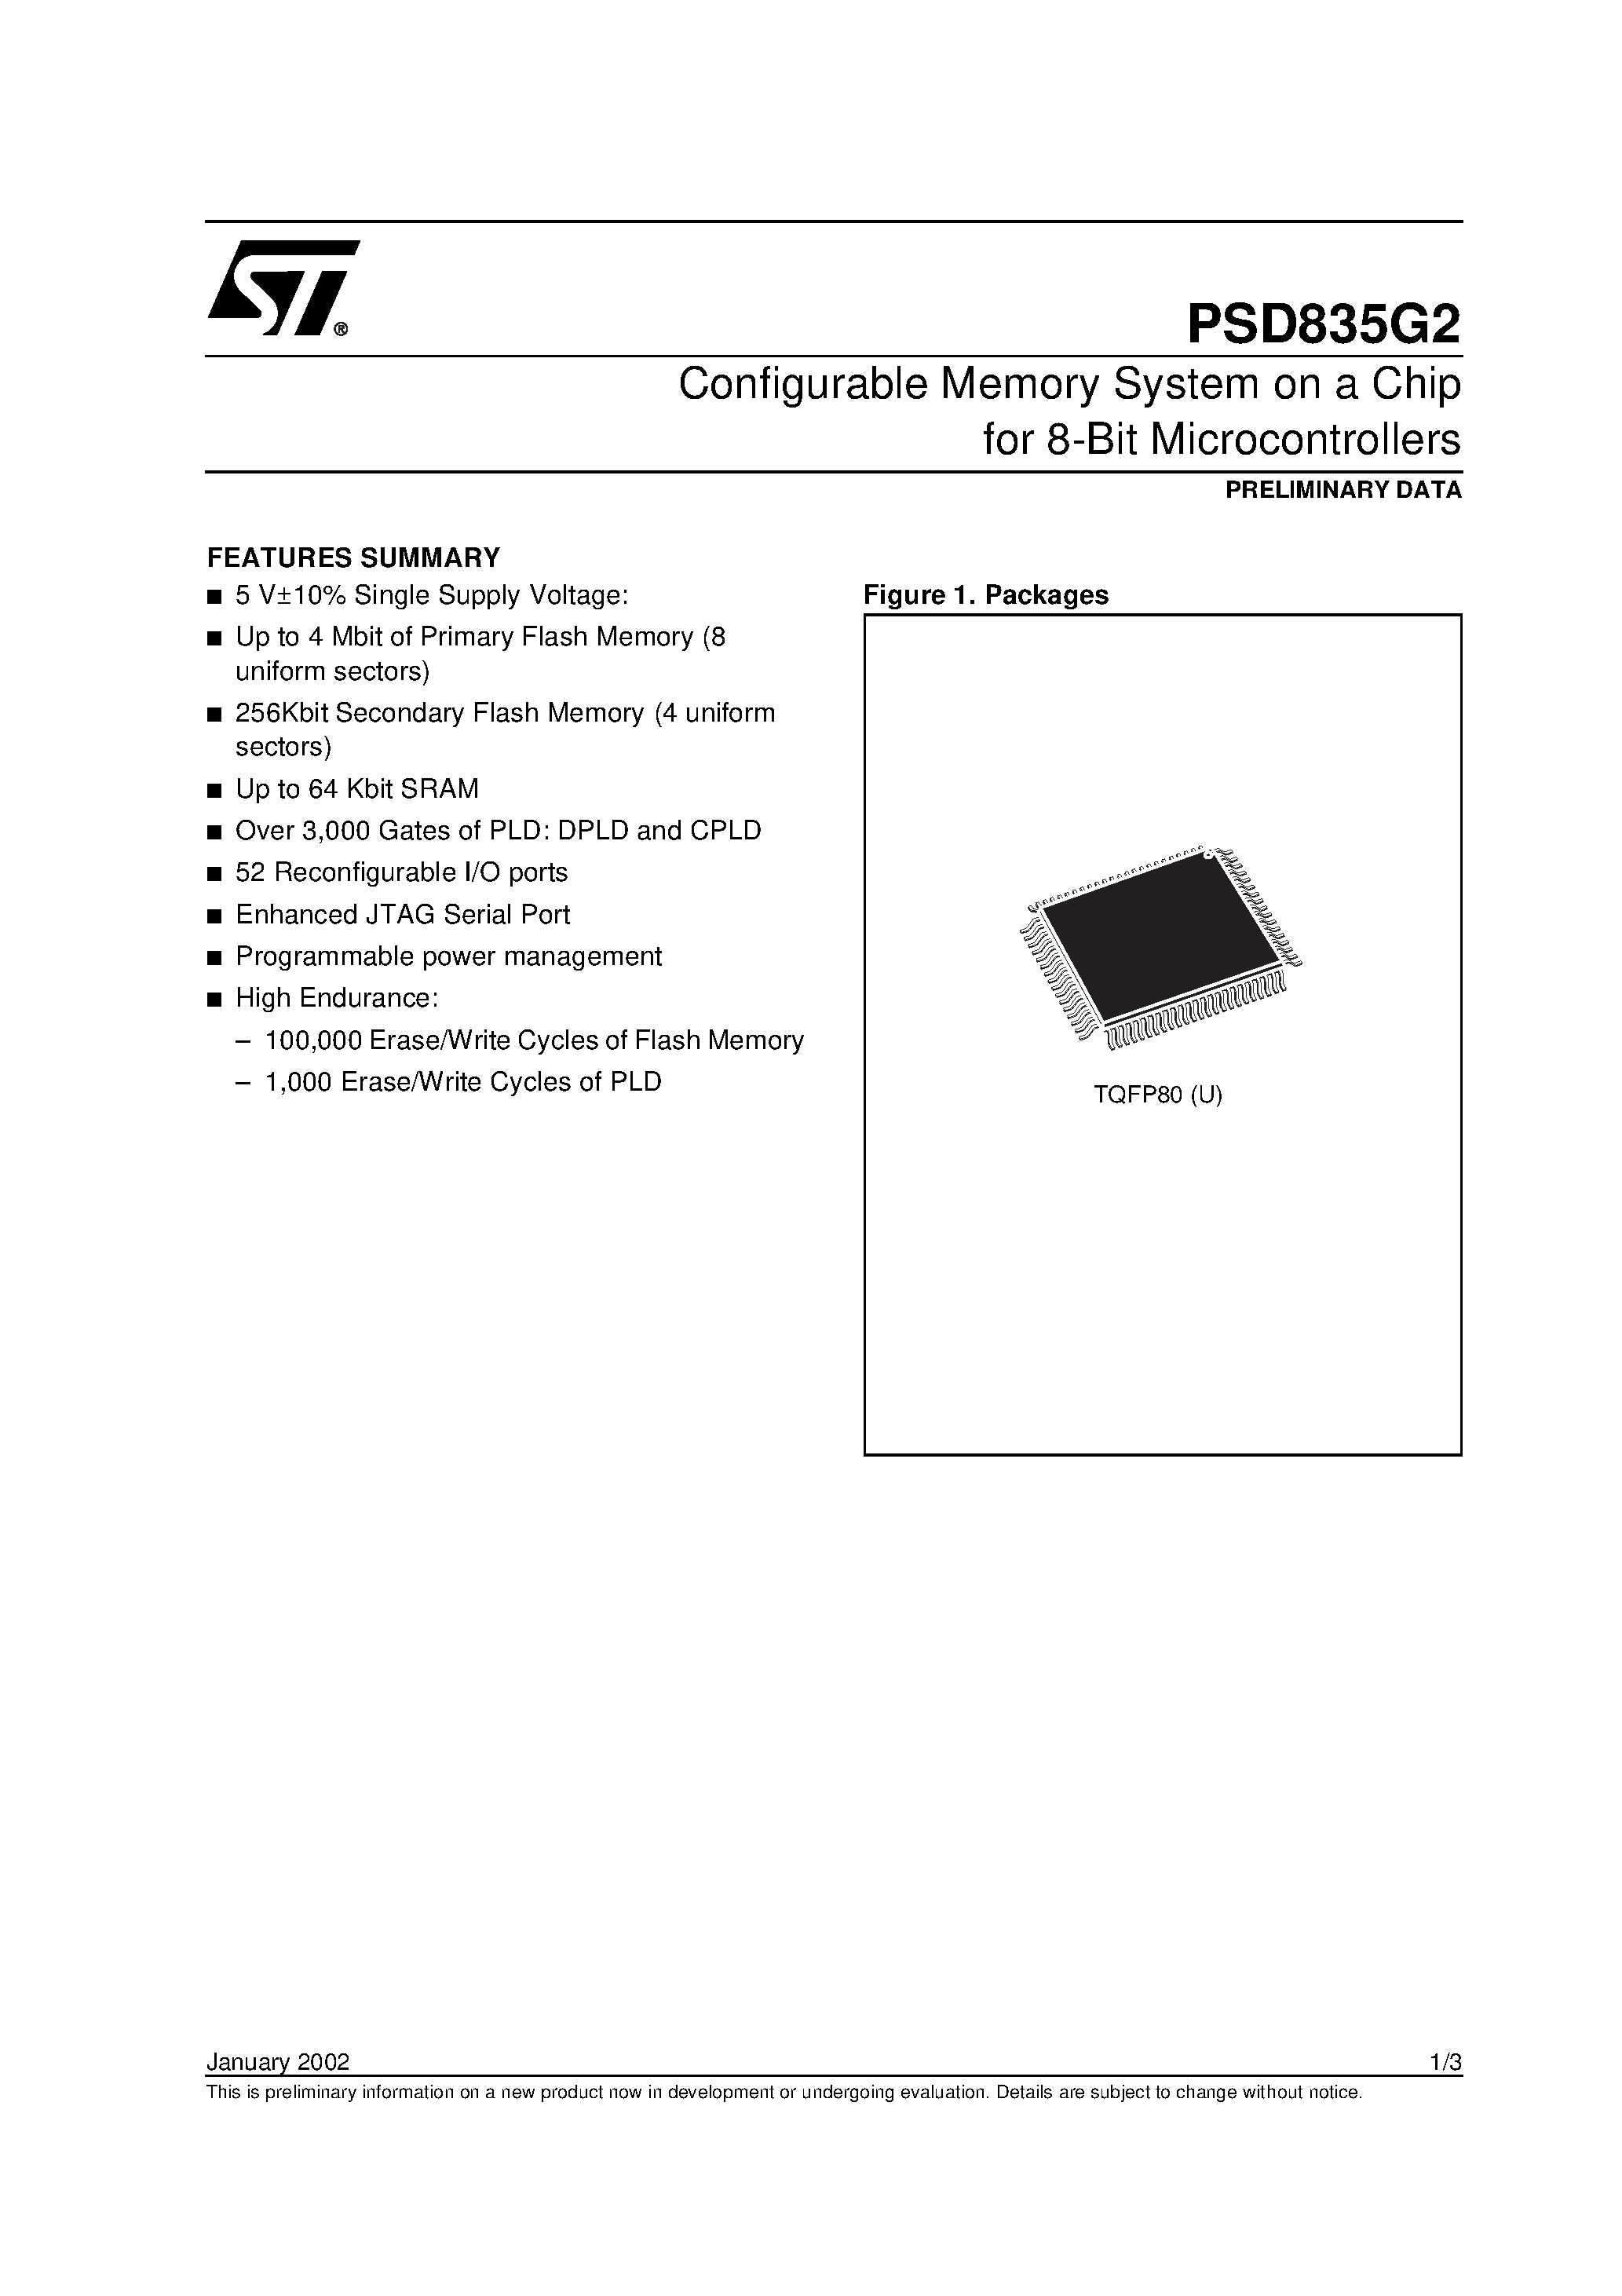 Datasheet PSD835F2-A-70UI - Configurable Memory System on a Chip for 8-Bit Microcontrollers page 1